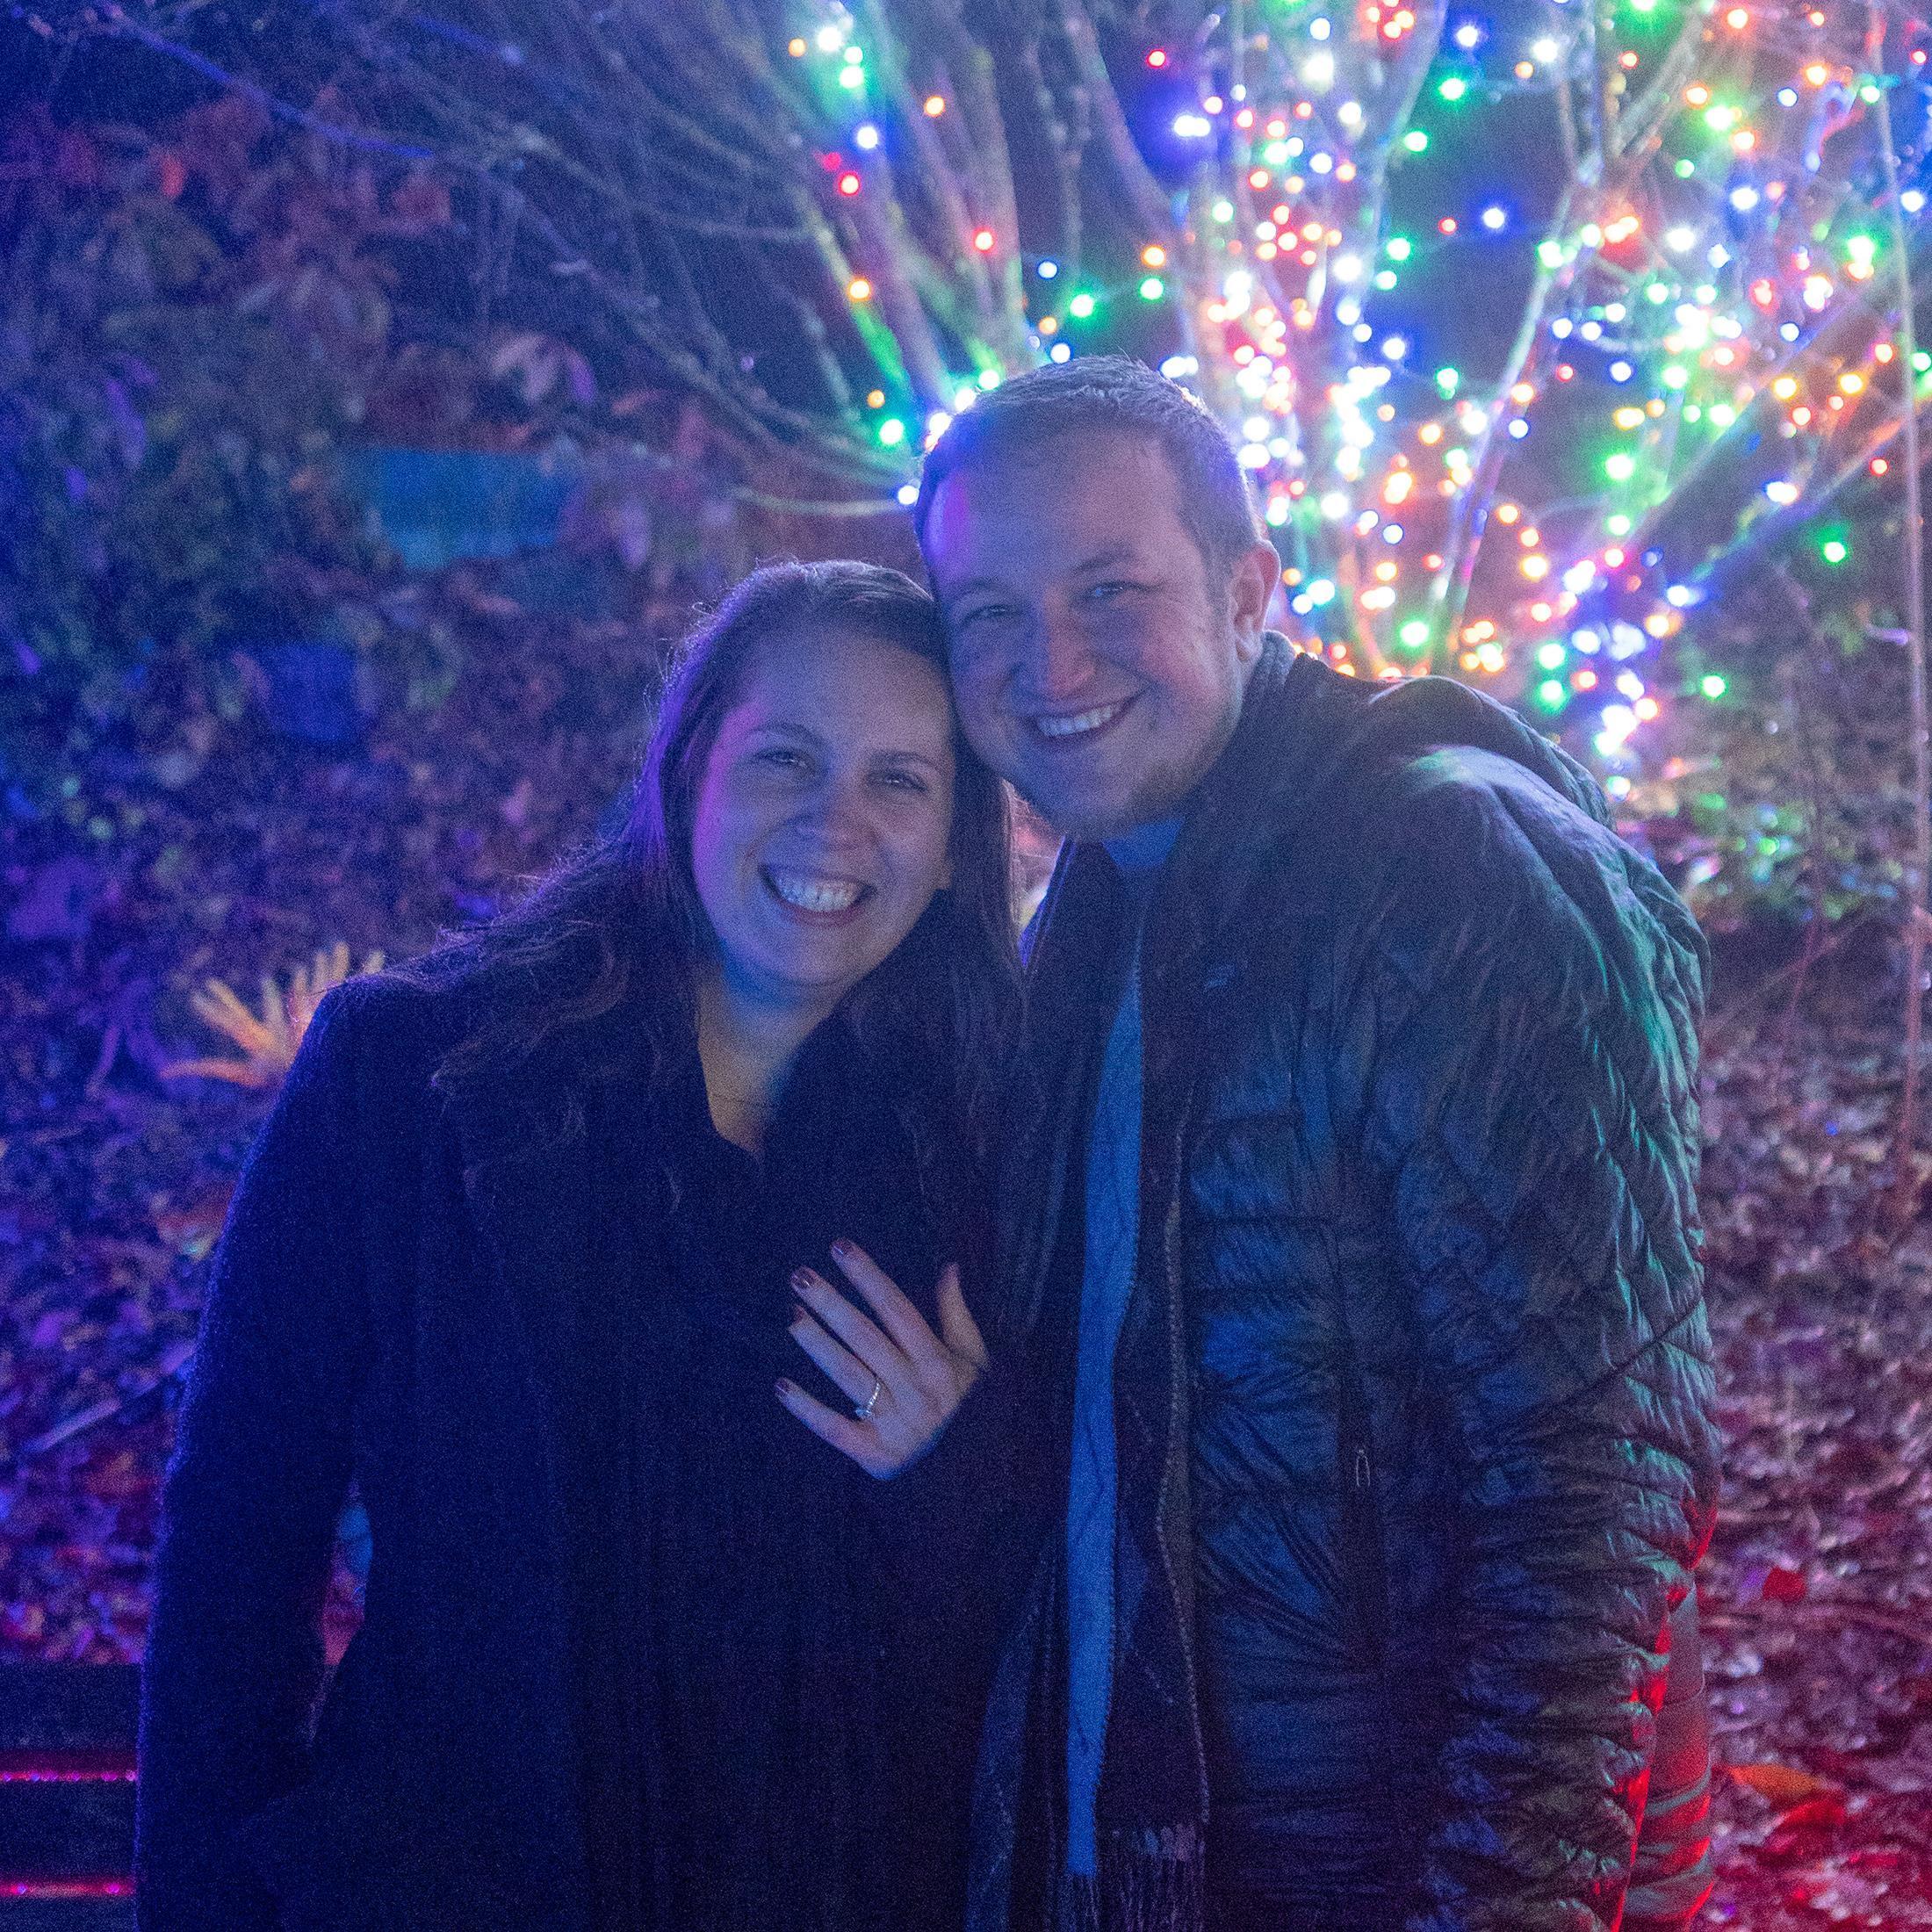 We got engaged under the Sequoia near Pt Defiance, our original wedding venue. We visited the Pt Defiance zoo (Zoolights here) just after, to echo our first date at the zoo a year before! 💍